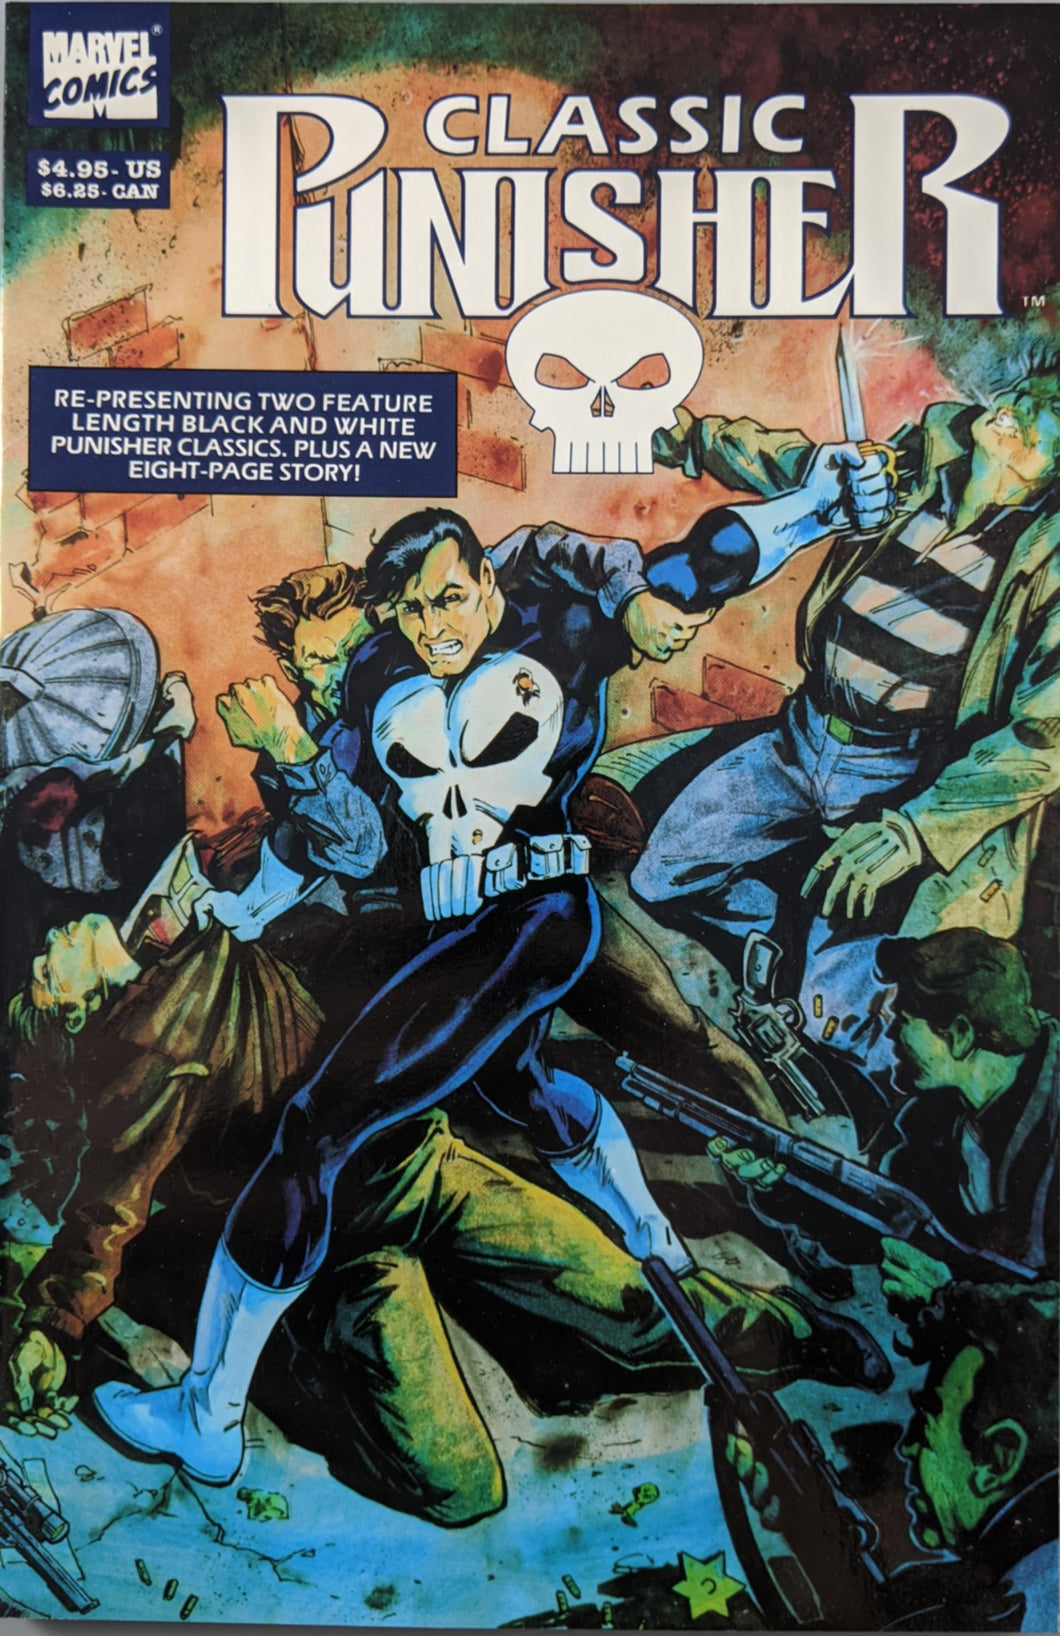 The Punisher '89 Book